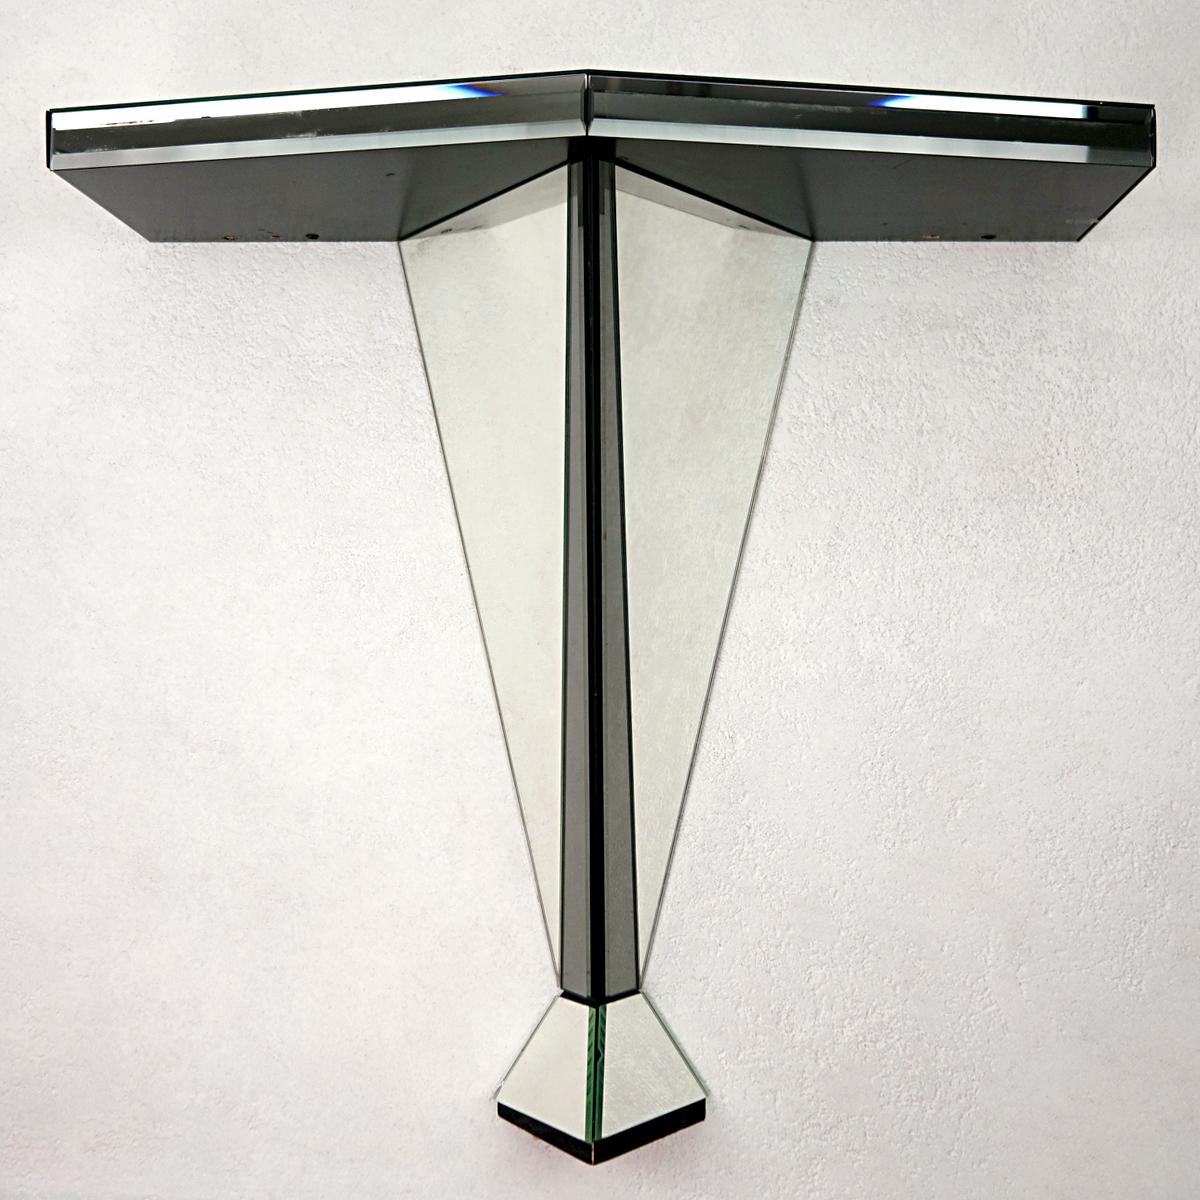 This console or side table has a remarkable presence due to the fact that it mostly consists of mirrored glass. It embellishes every object displayed on it by doubling its images and reflecting the light on it in a magical manner. The black edges